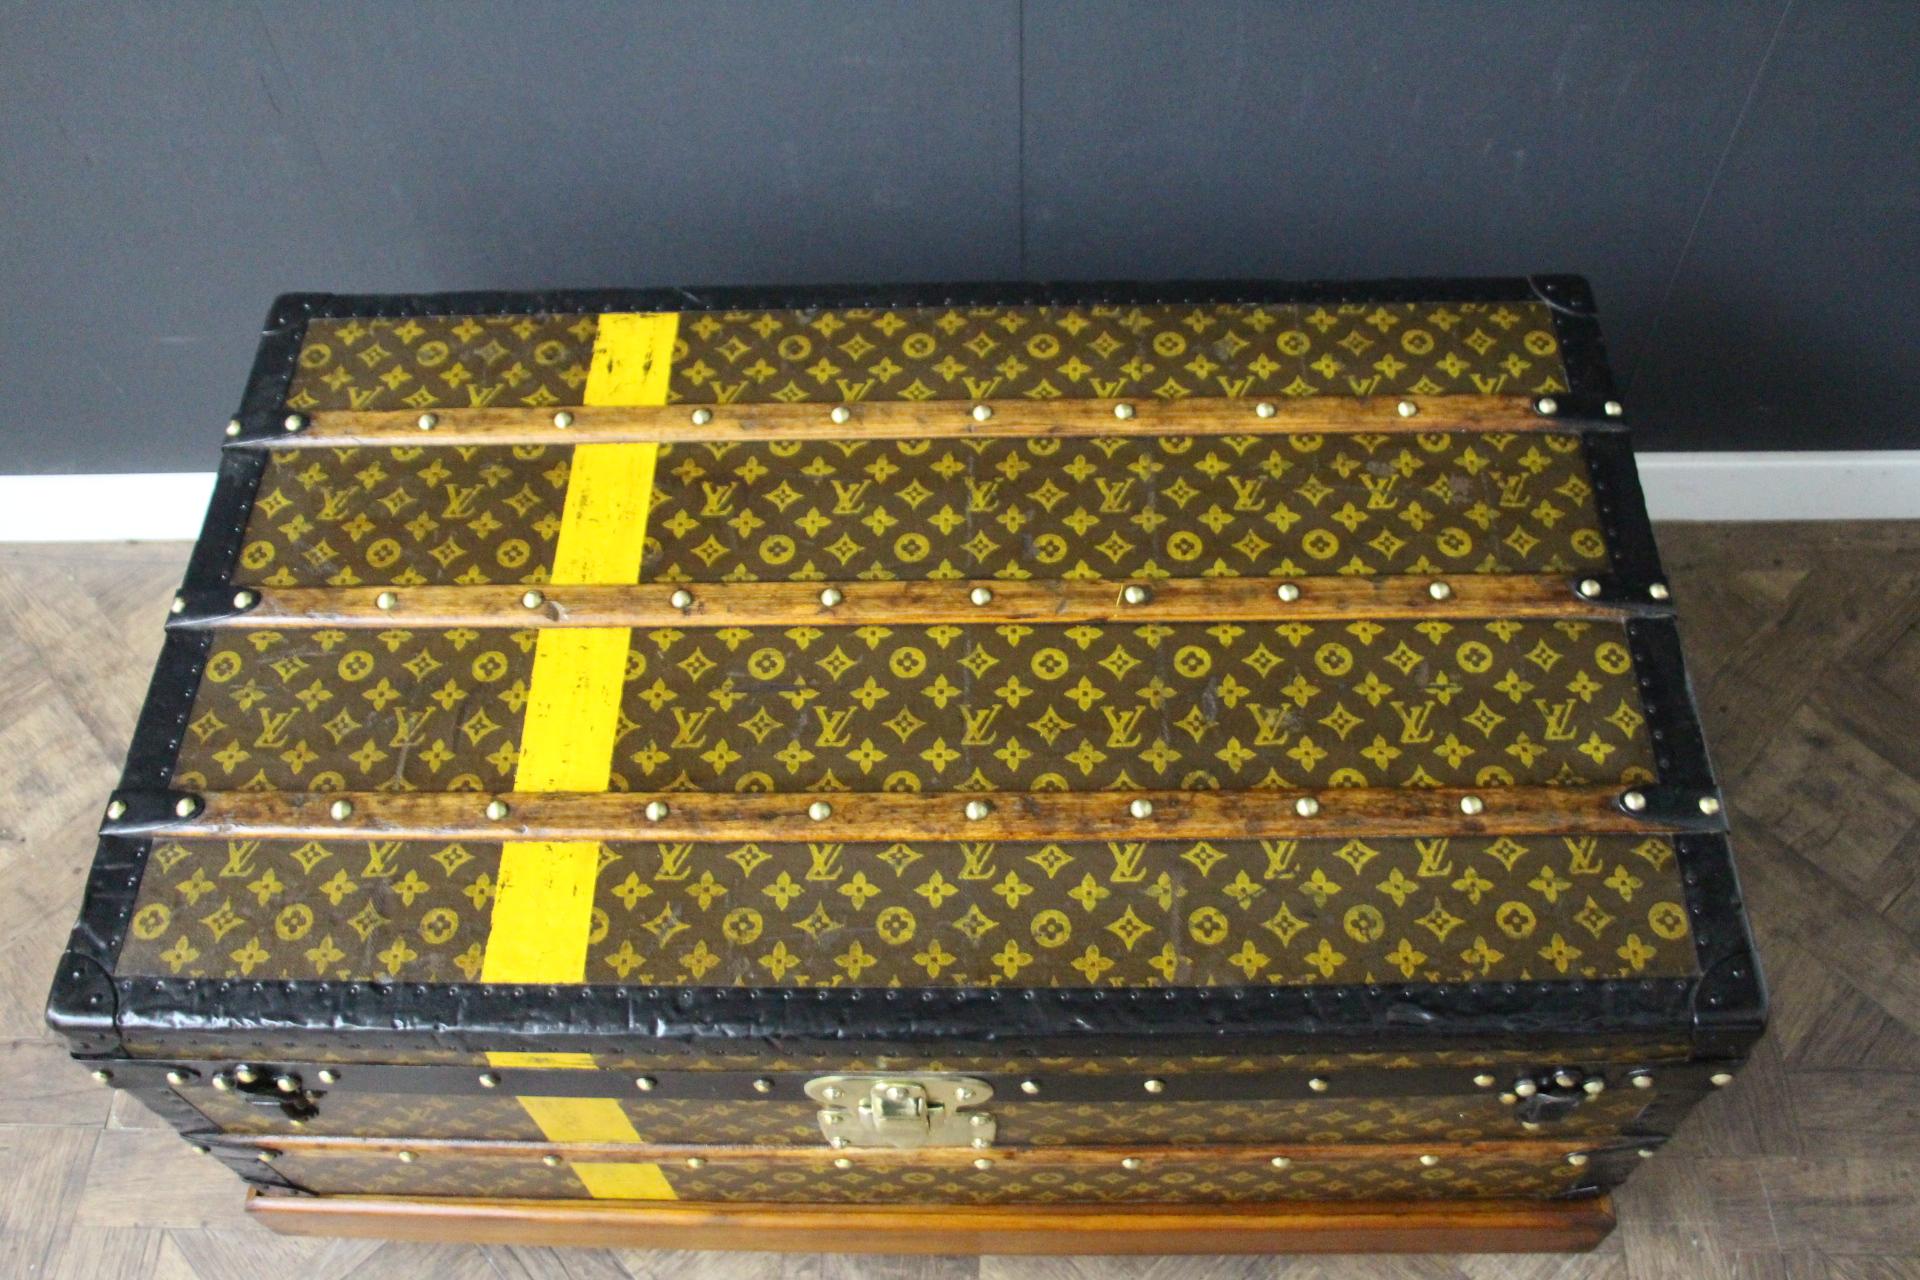 This very nice Louis Vuitton trunk features hand stenciled monogram canvas , black steel trim and Louis Vuitton stamped solid brass lock and and steel clasps, as well as black steel side handles. Its patina is warm and elegant. It has got hand